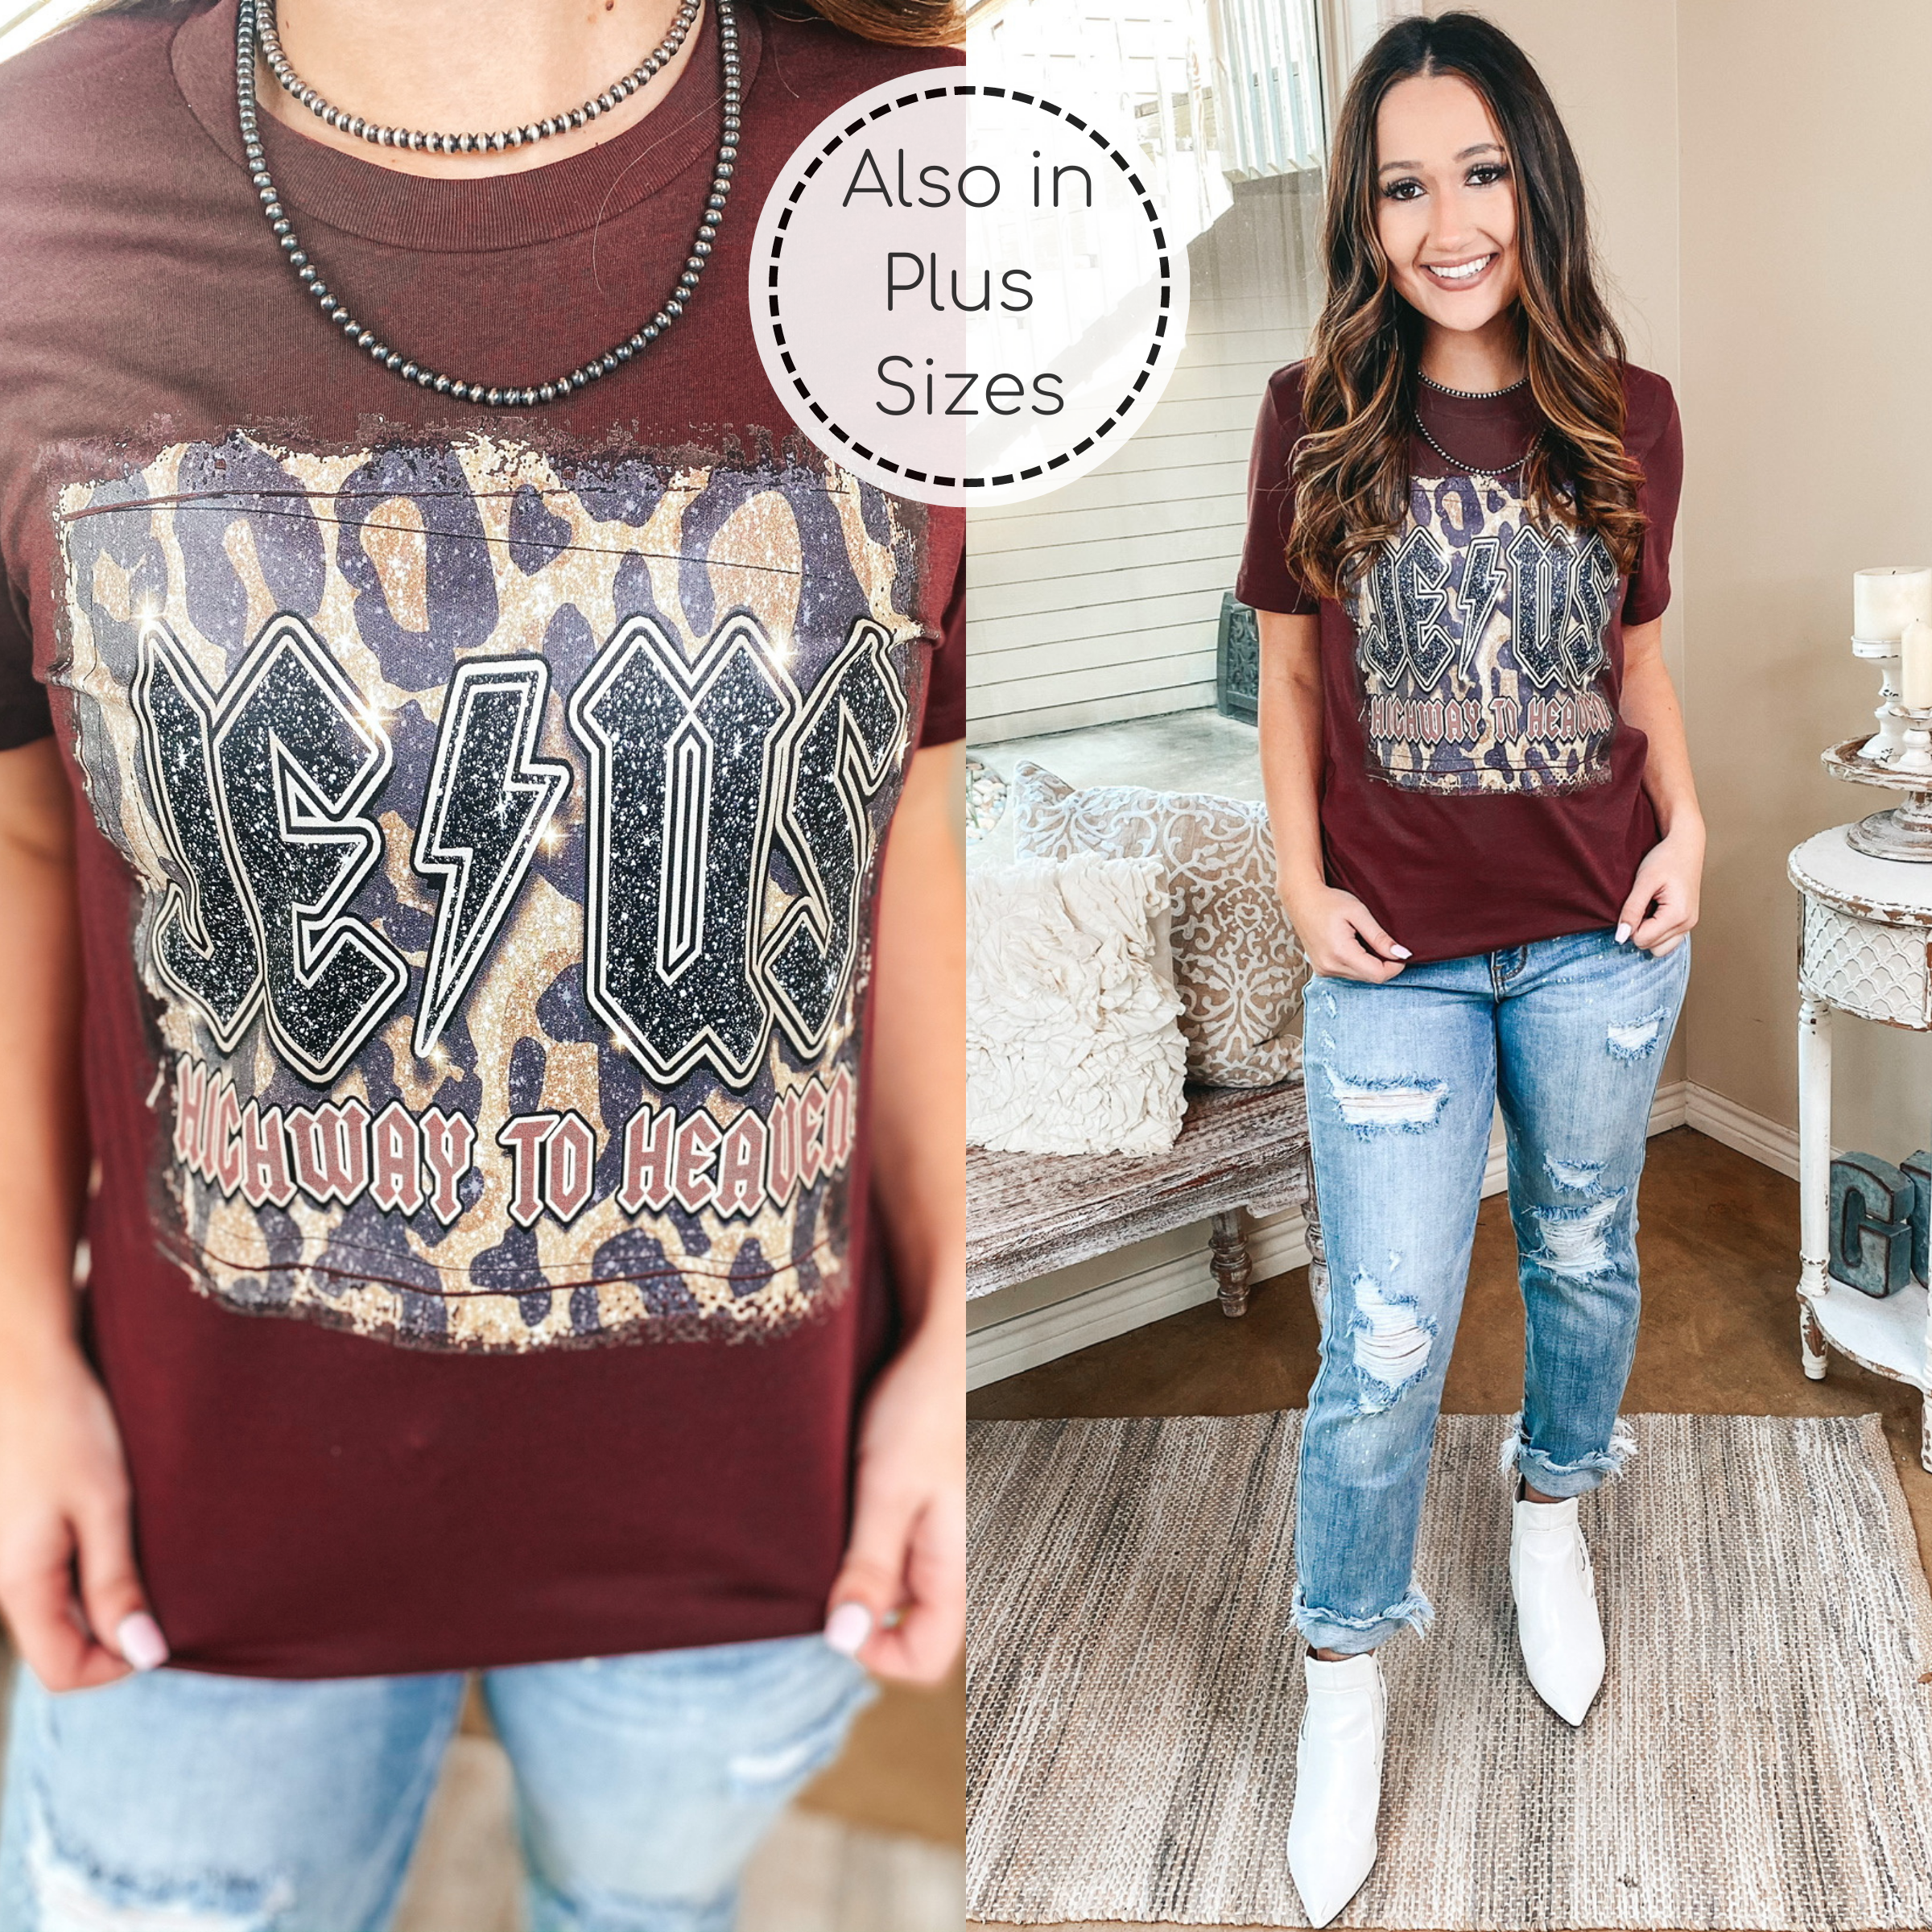 Jesus Is The Highway To Heaven Short Sleeve Graphic Tee in Maroon - Giddy Up Glamour Boutique